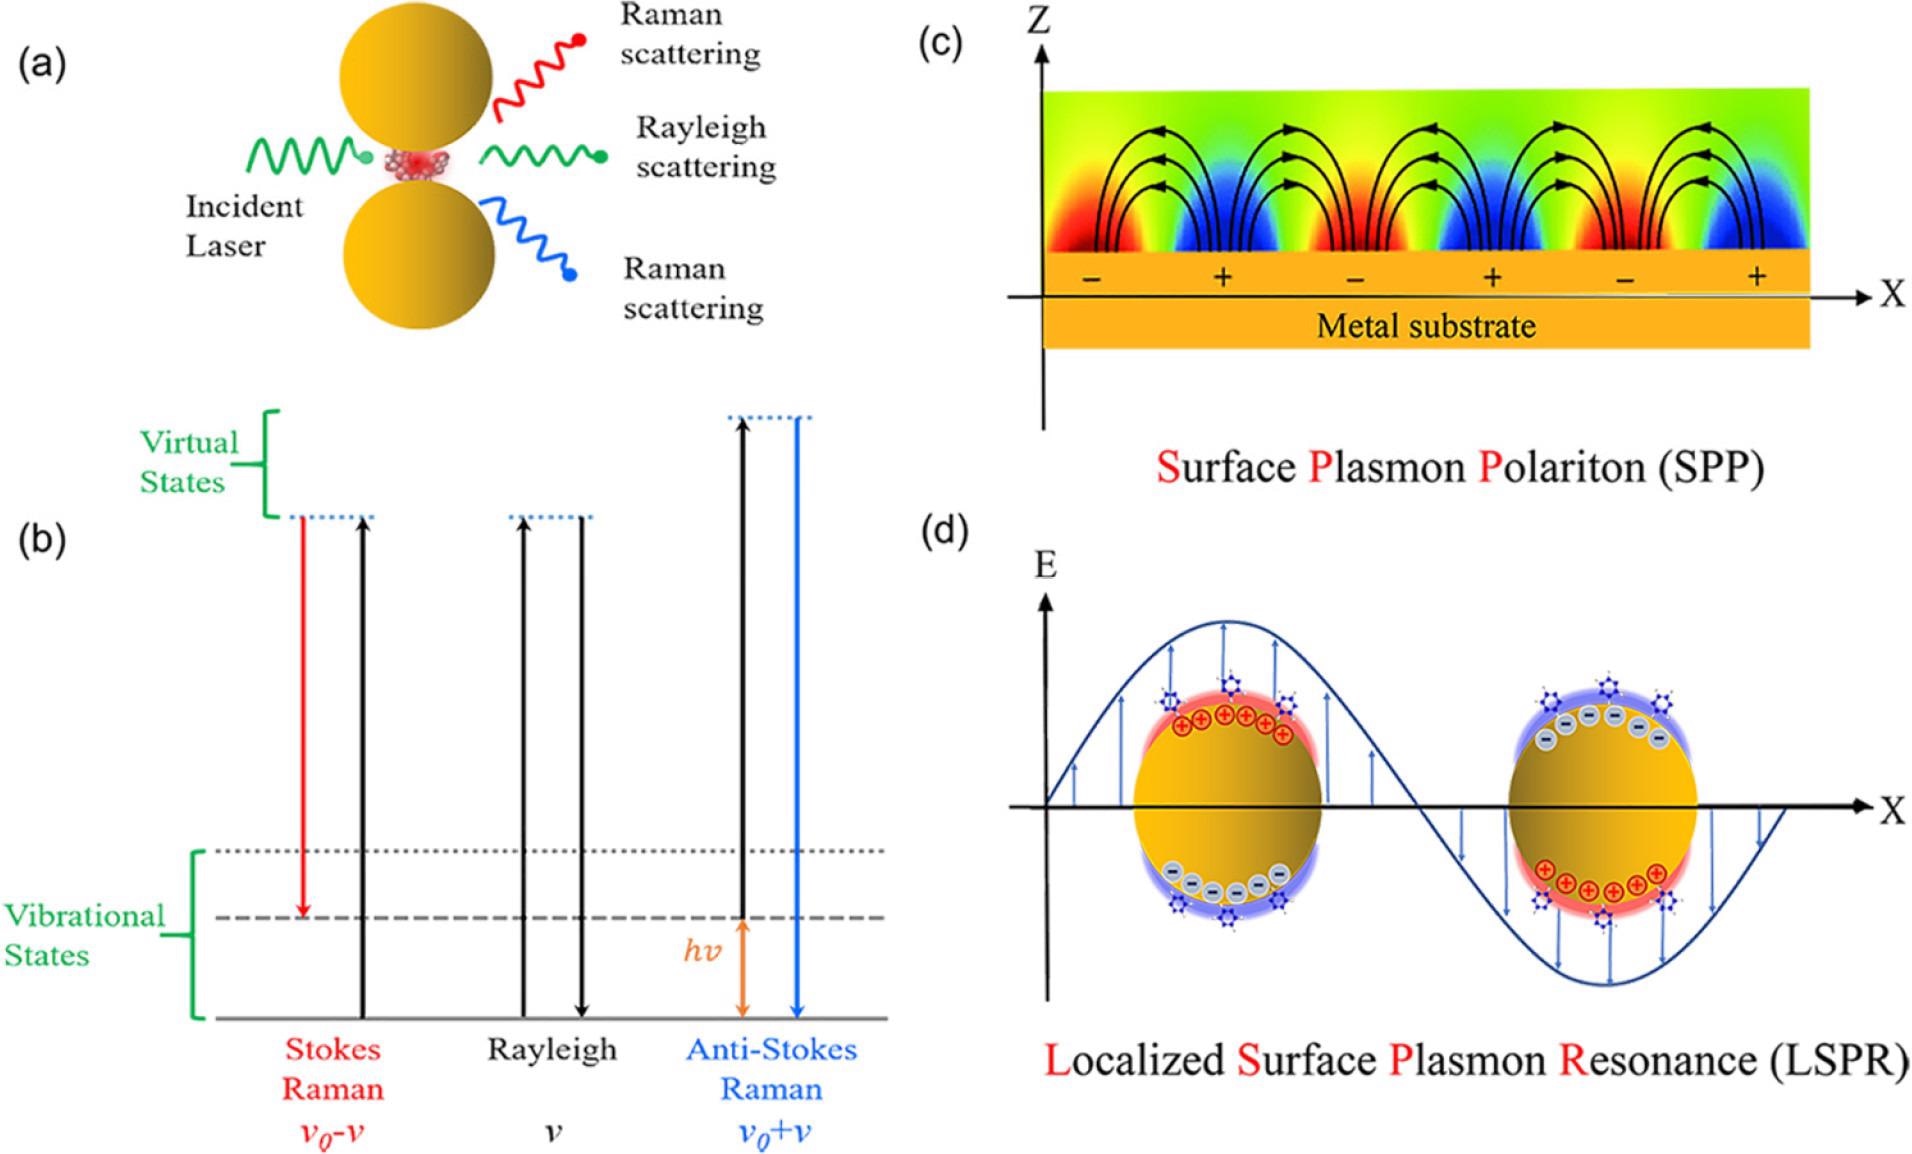 (a) Scheme of Raman and Rayleigh scattering of light by a molecule located between two metallic nanoparticles involving a hot spot. (b) Jablonski diagram representing the quantum energy transitions for Raman and Rayleigh scattering of a molecule. Schematic diagrams illustrating (c) surface plasmon polaritons at the surface of metal thin film and (d) localized surface plasmon resonance at metal nanoparticles.